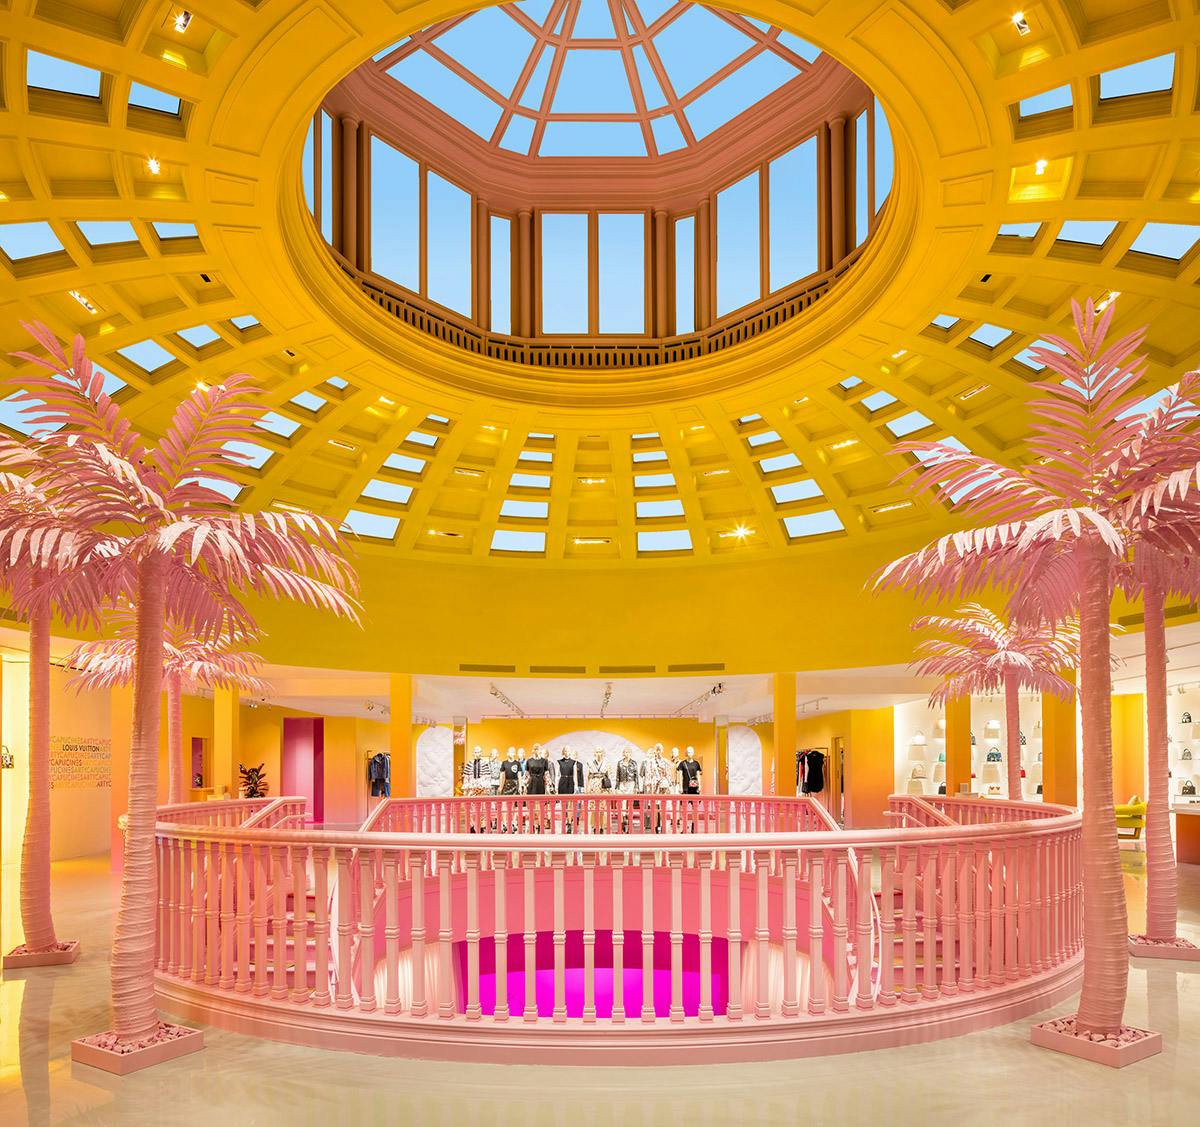 Louis Vuitton's “shoppable museum” pop-up makes a pitstop in Beverly Hills, News